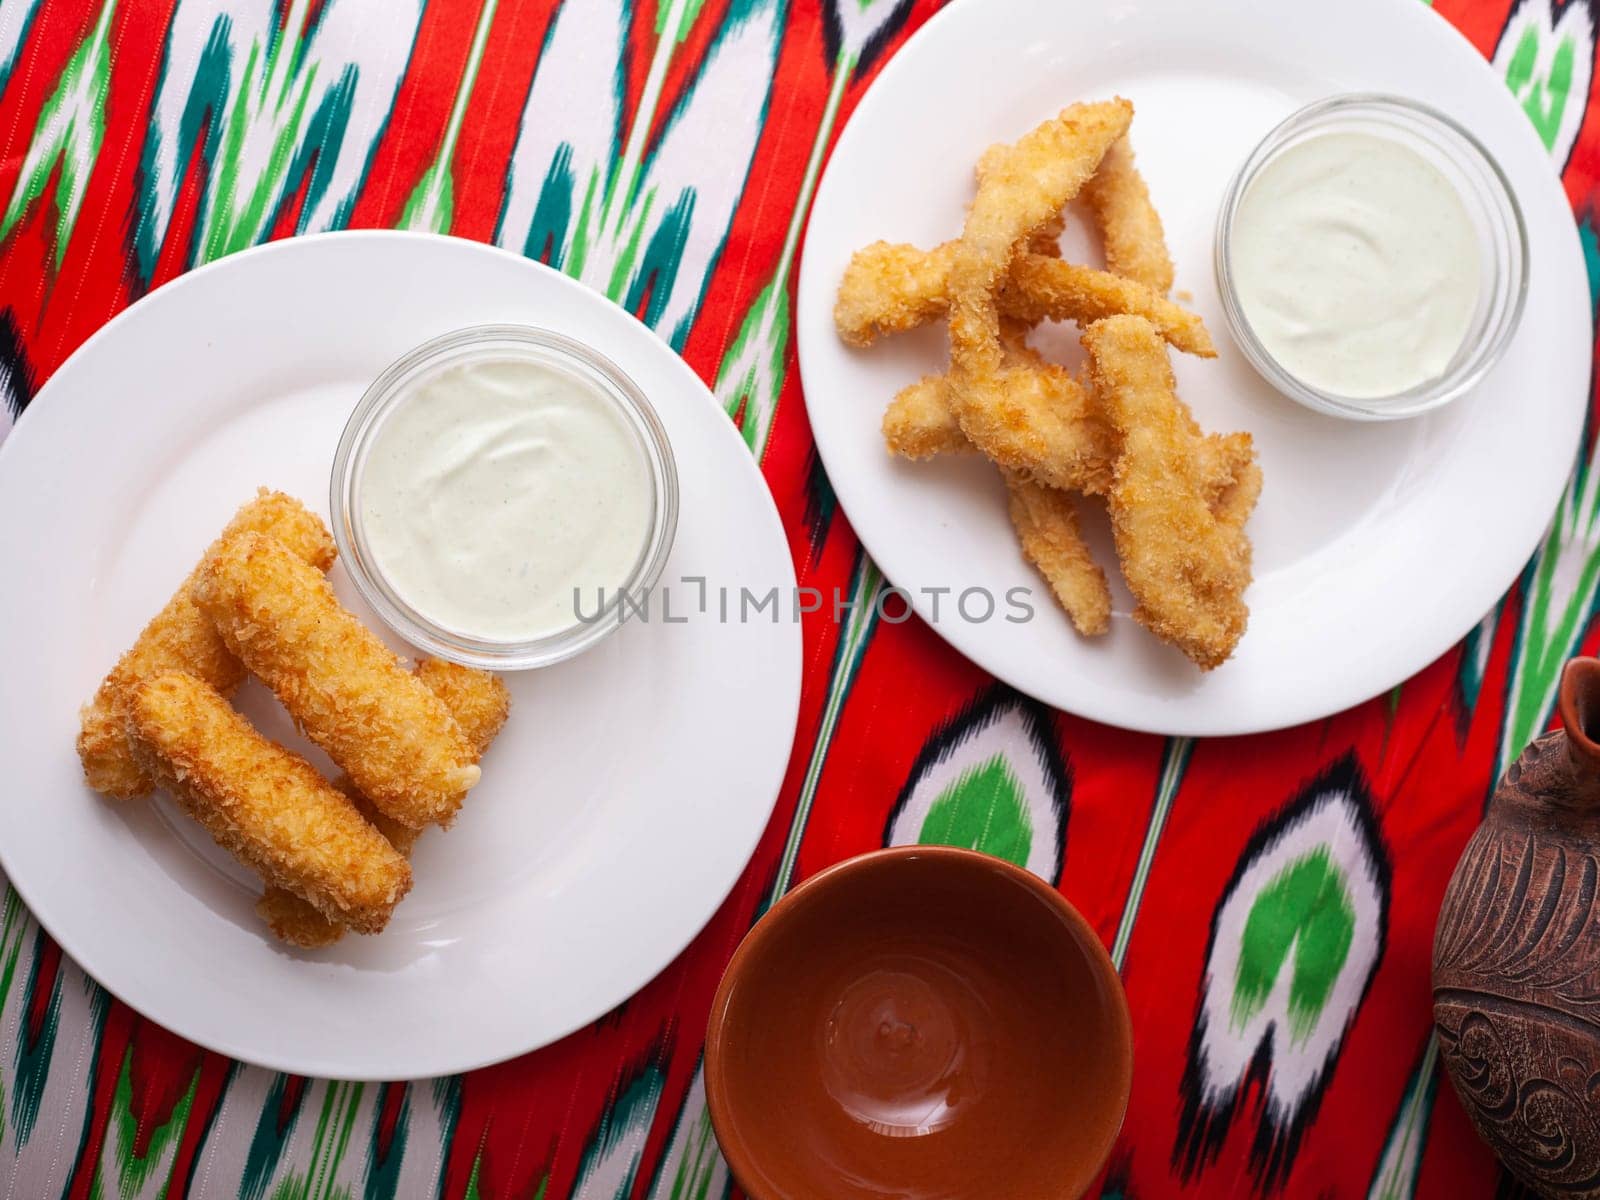 cheese sticks and chicken nuggets - fried cheese and breaded fried chicken served with a creamy sauce. Asian style. High quality photo